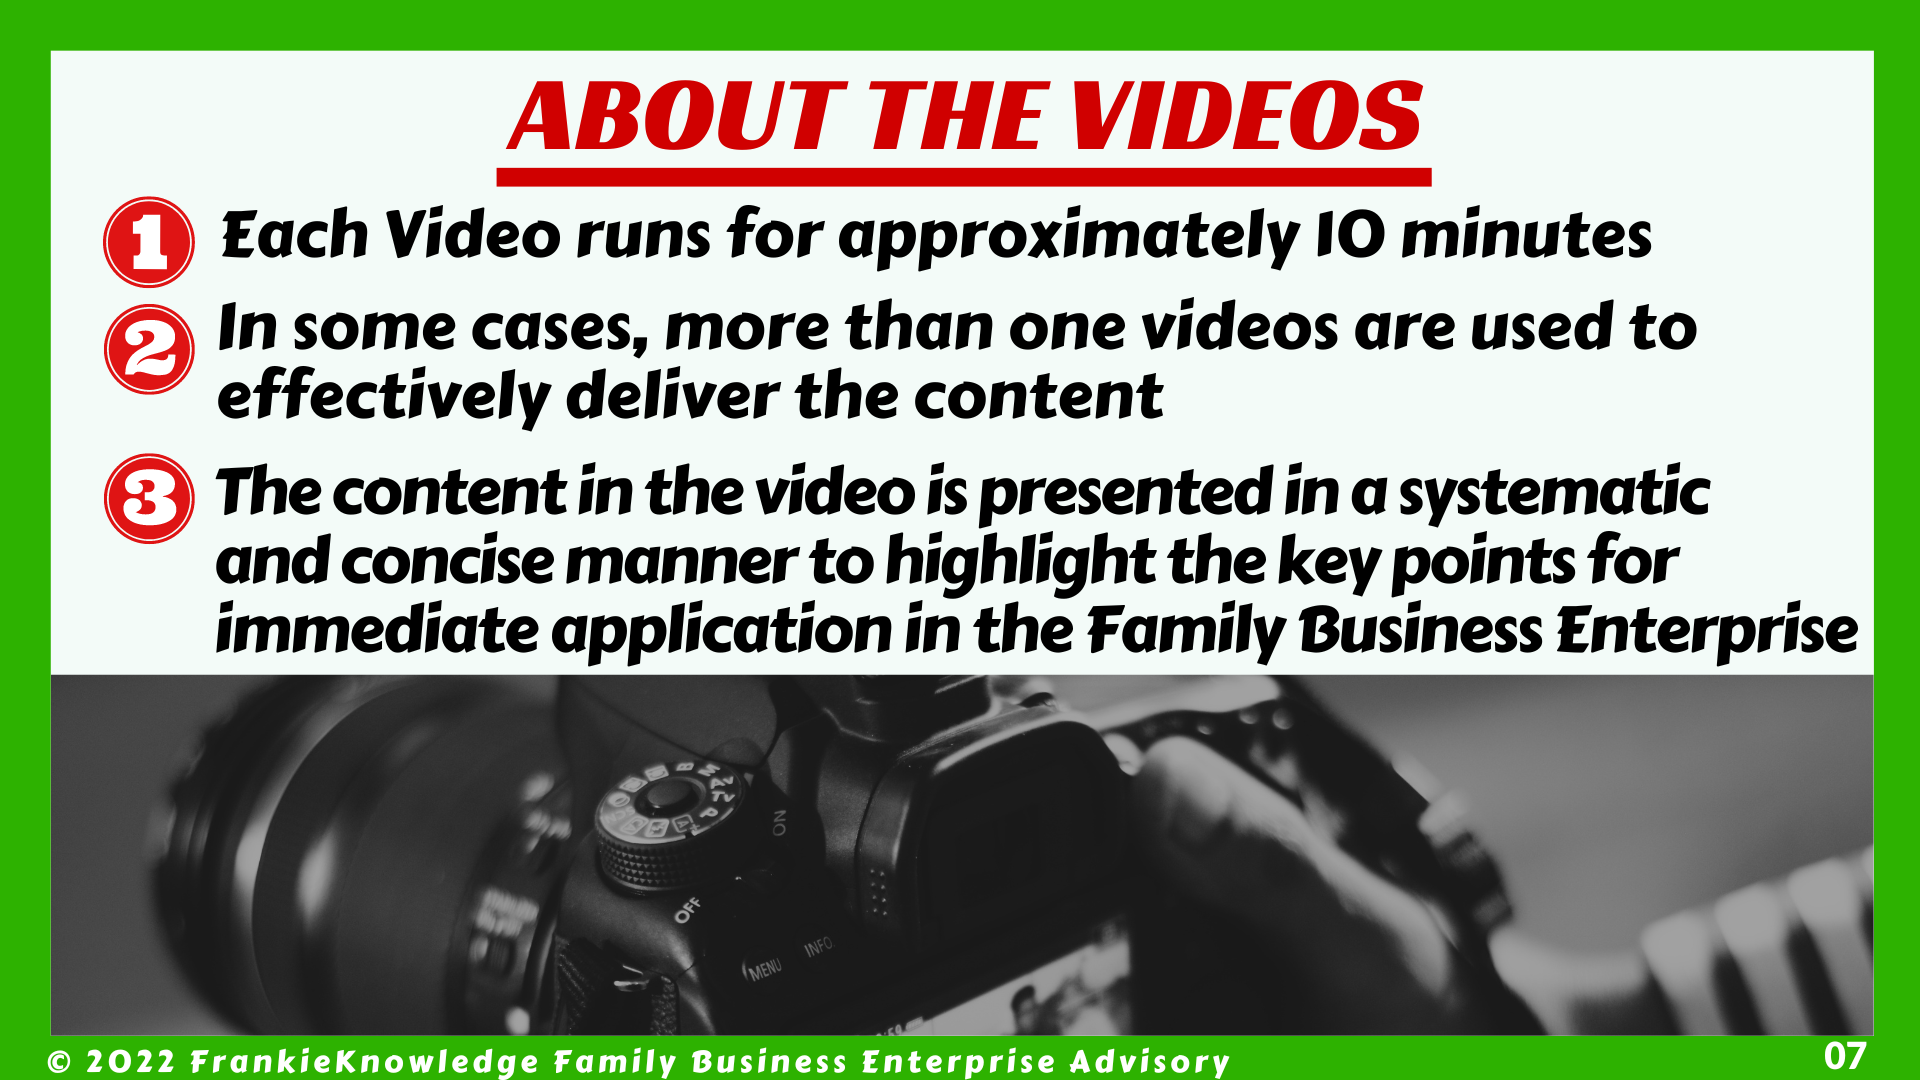 The content in the FrankieKnowledge Premium Video is presented in a systematic and concise manner to highlight the key points for immediate application in the Family Business Enterprise